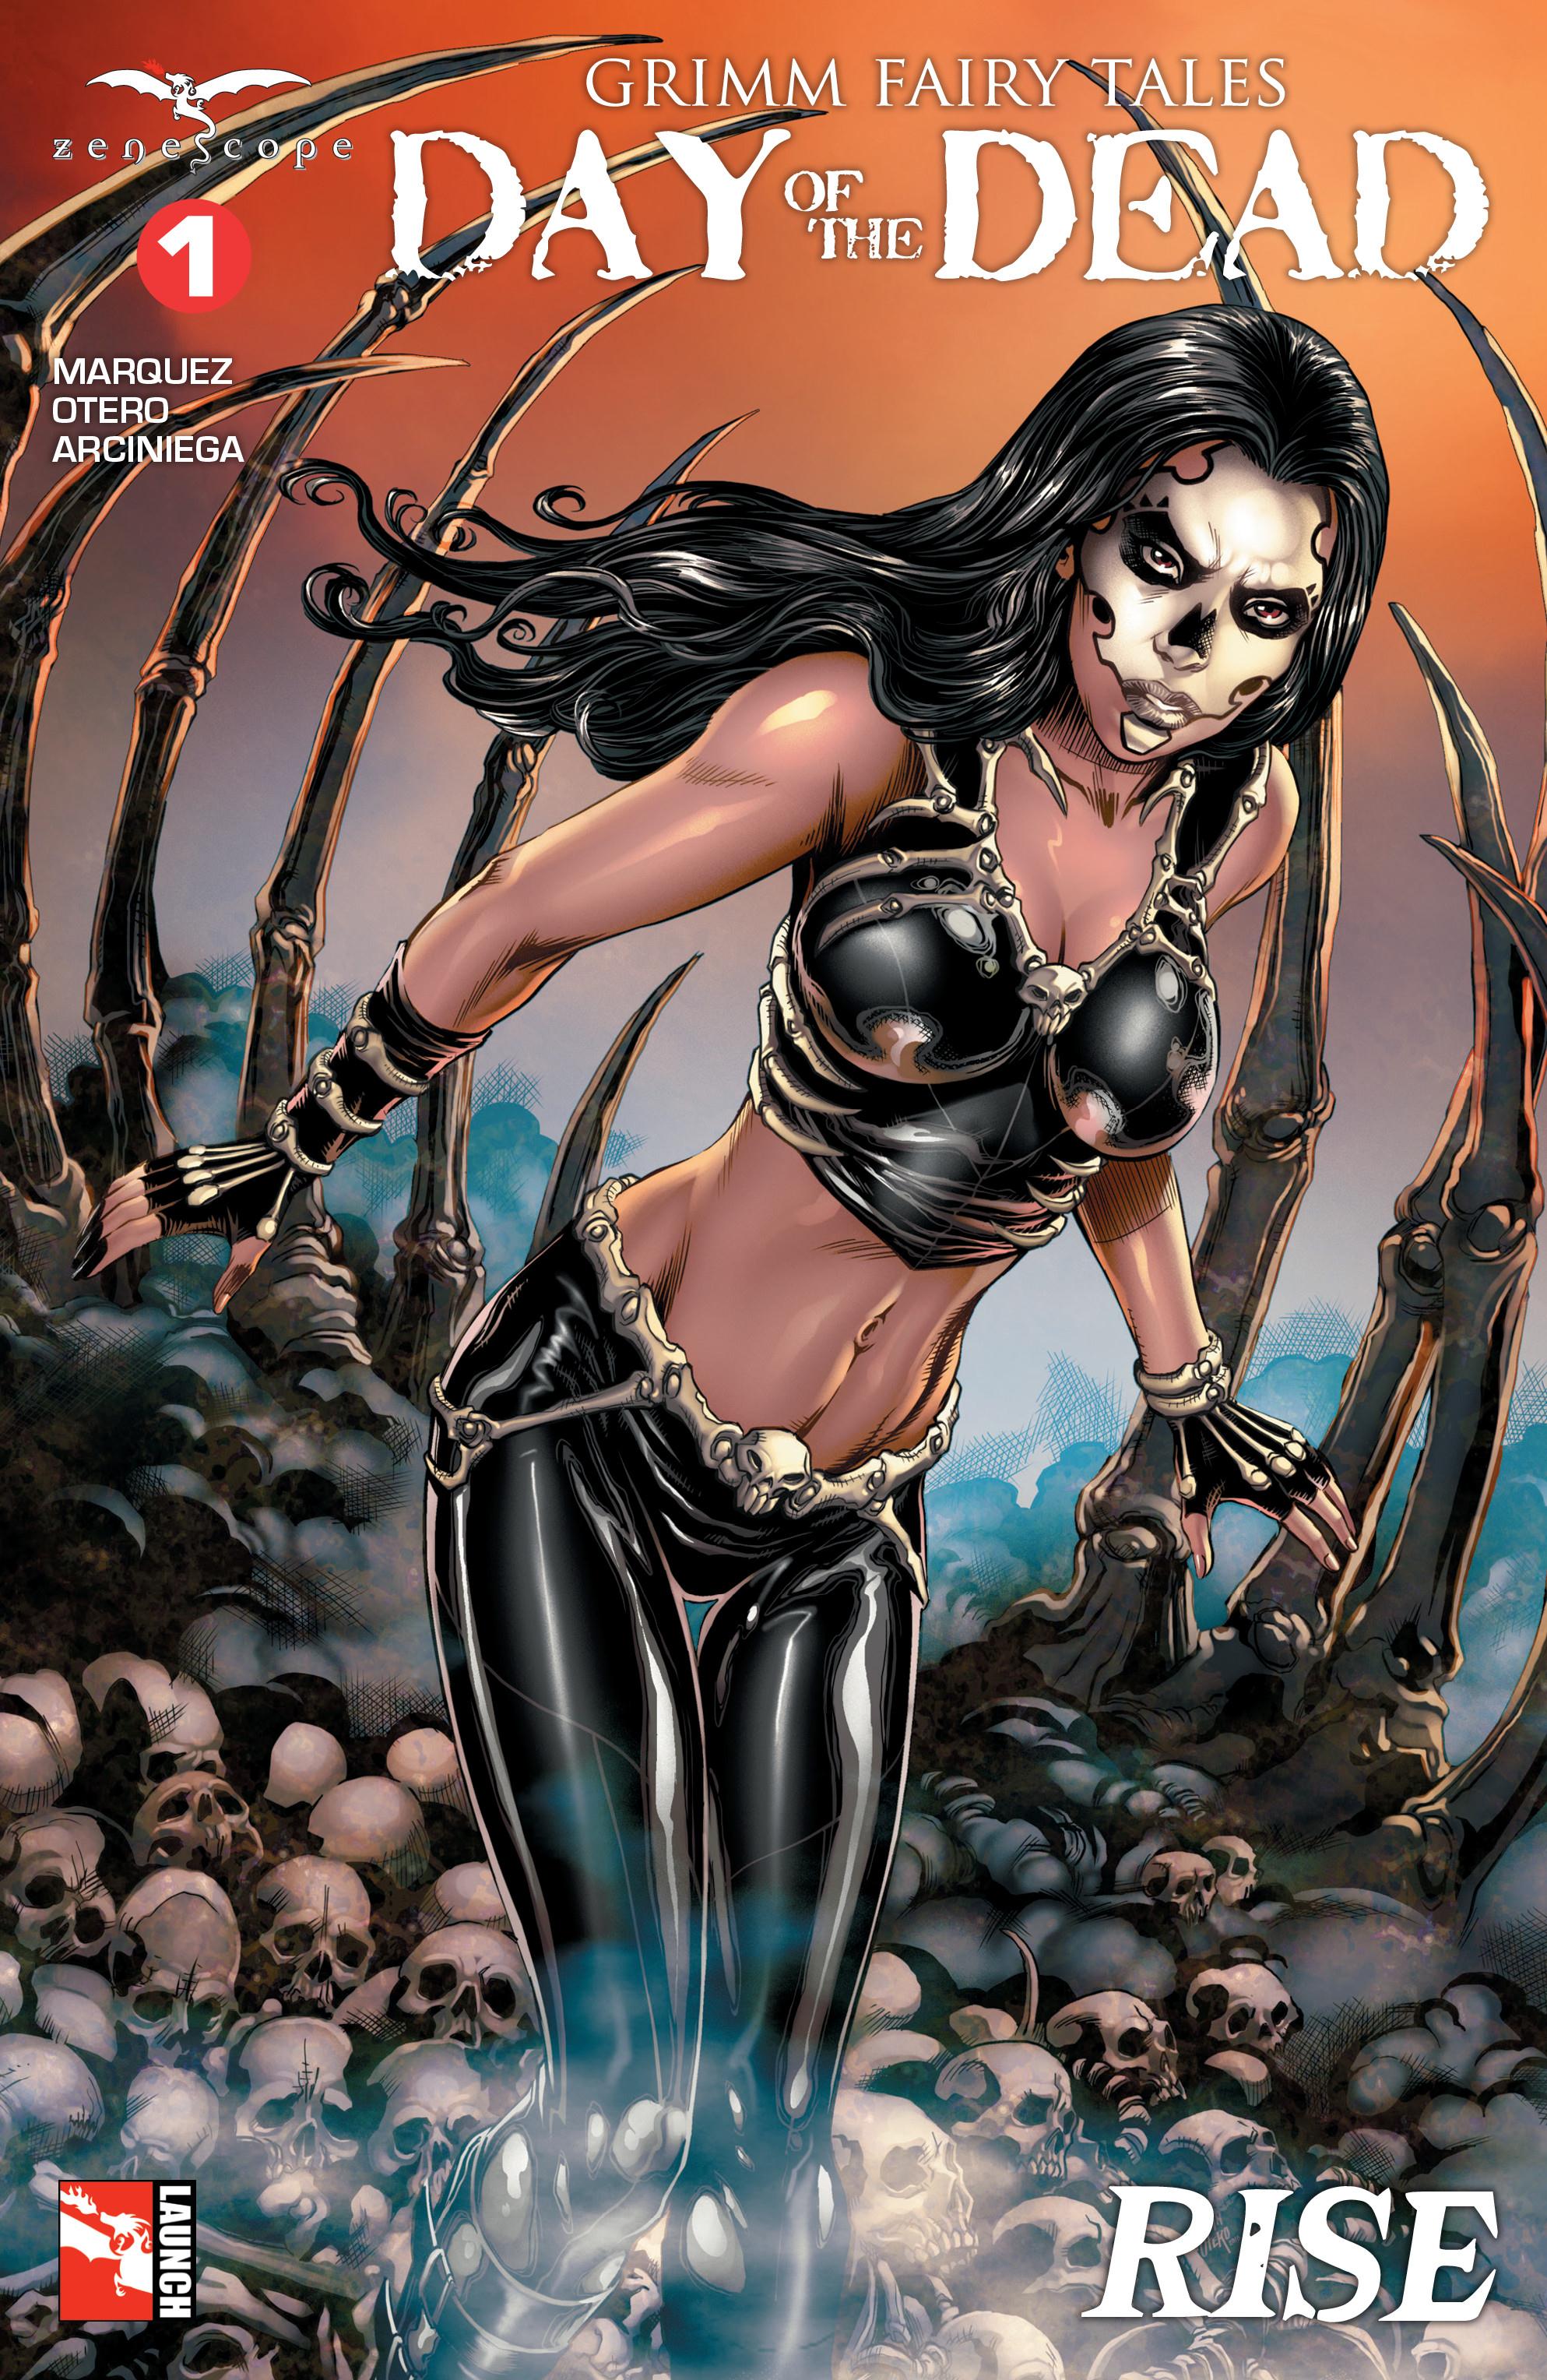 Grimm Fairy Tales Day of the Dead 001